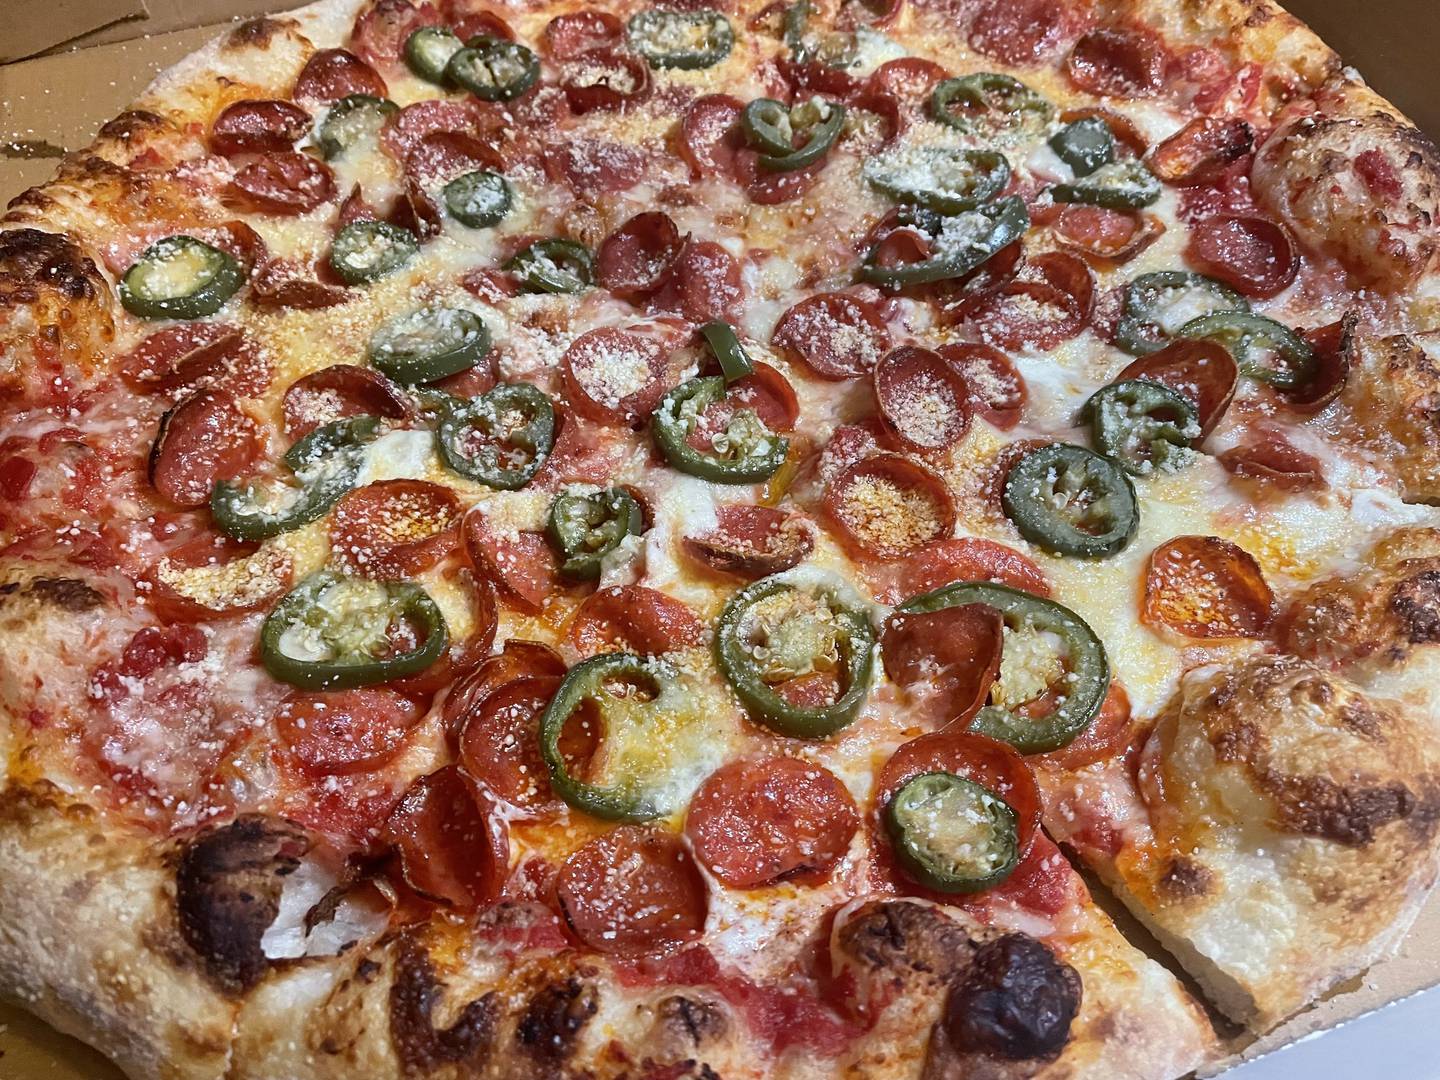 The spicy pepperoni pizza at Baltoz Bakery & Cafe, a new arrival to 6709 York Road. Owner Vlado Petrovski resists categorization, saying “My pizza is my pizza.”